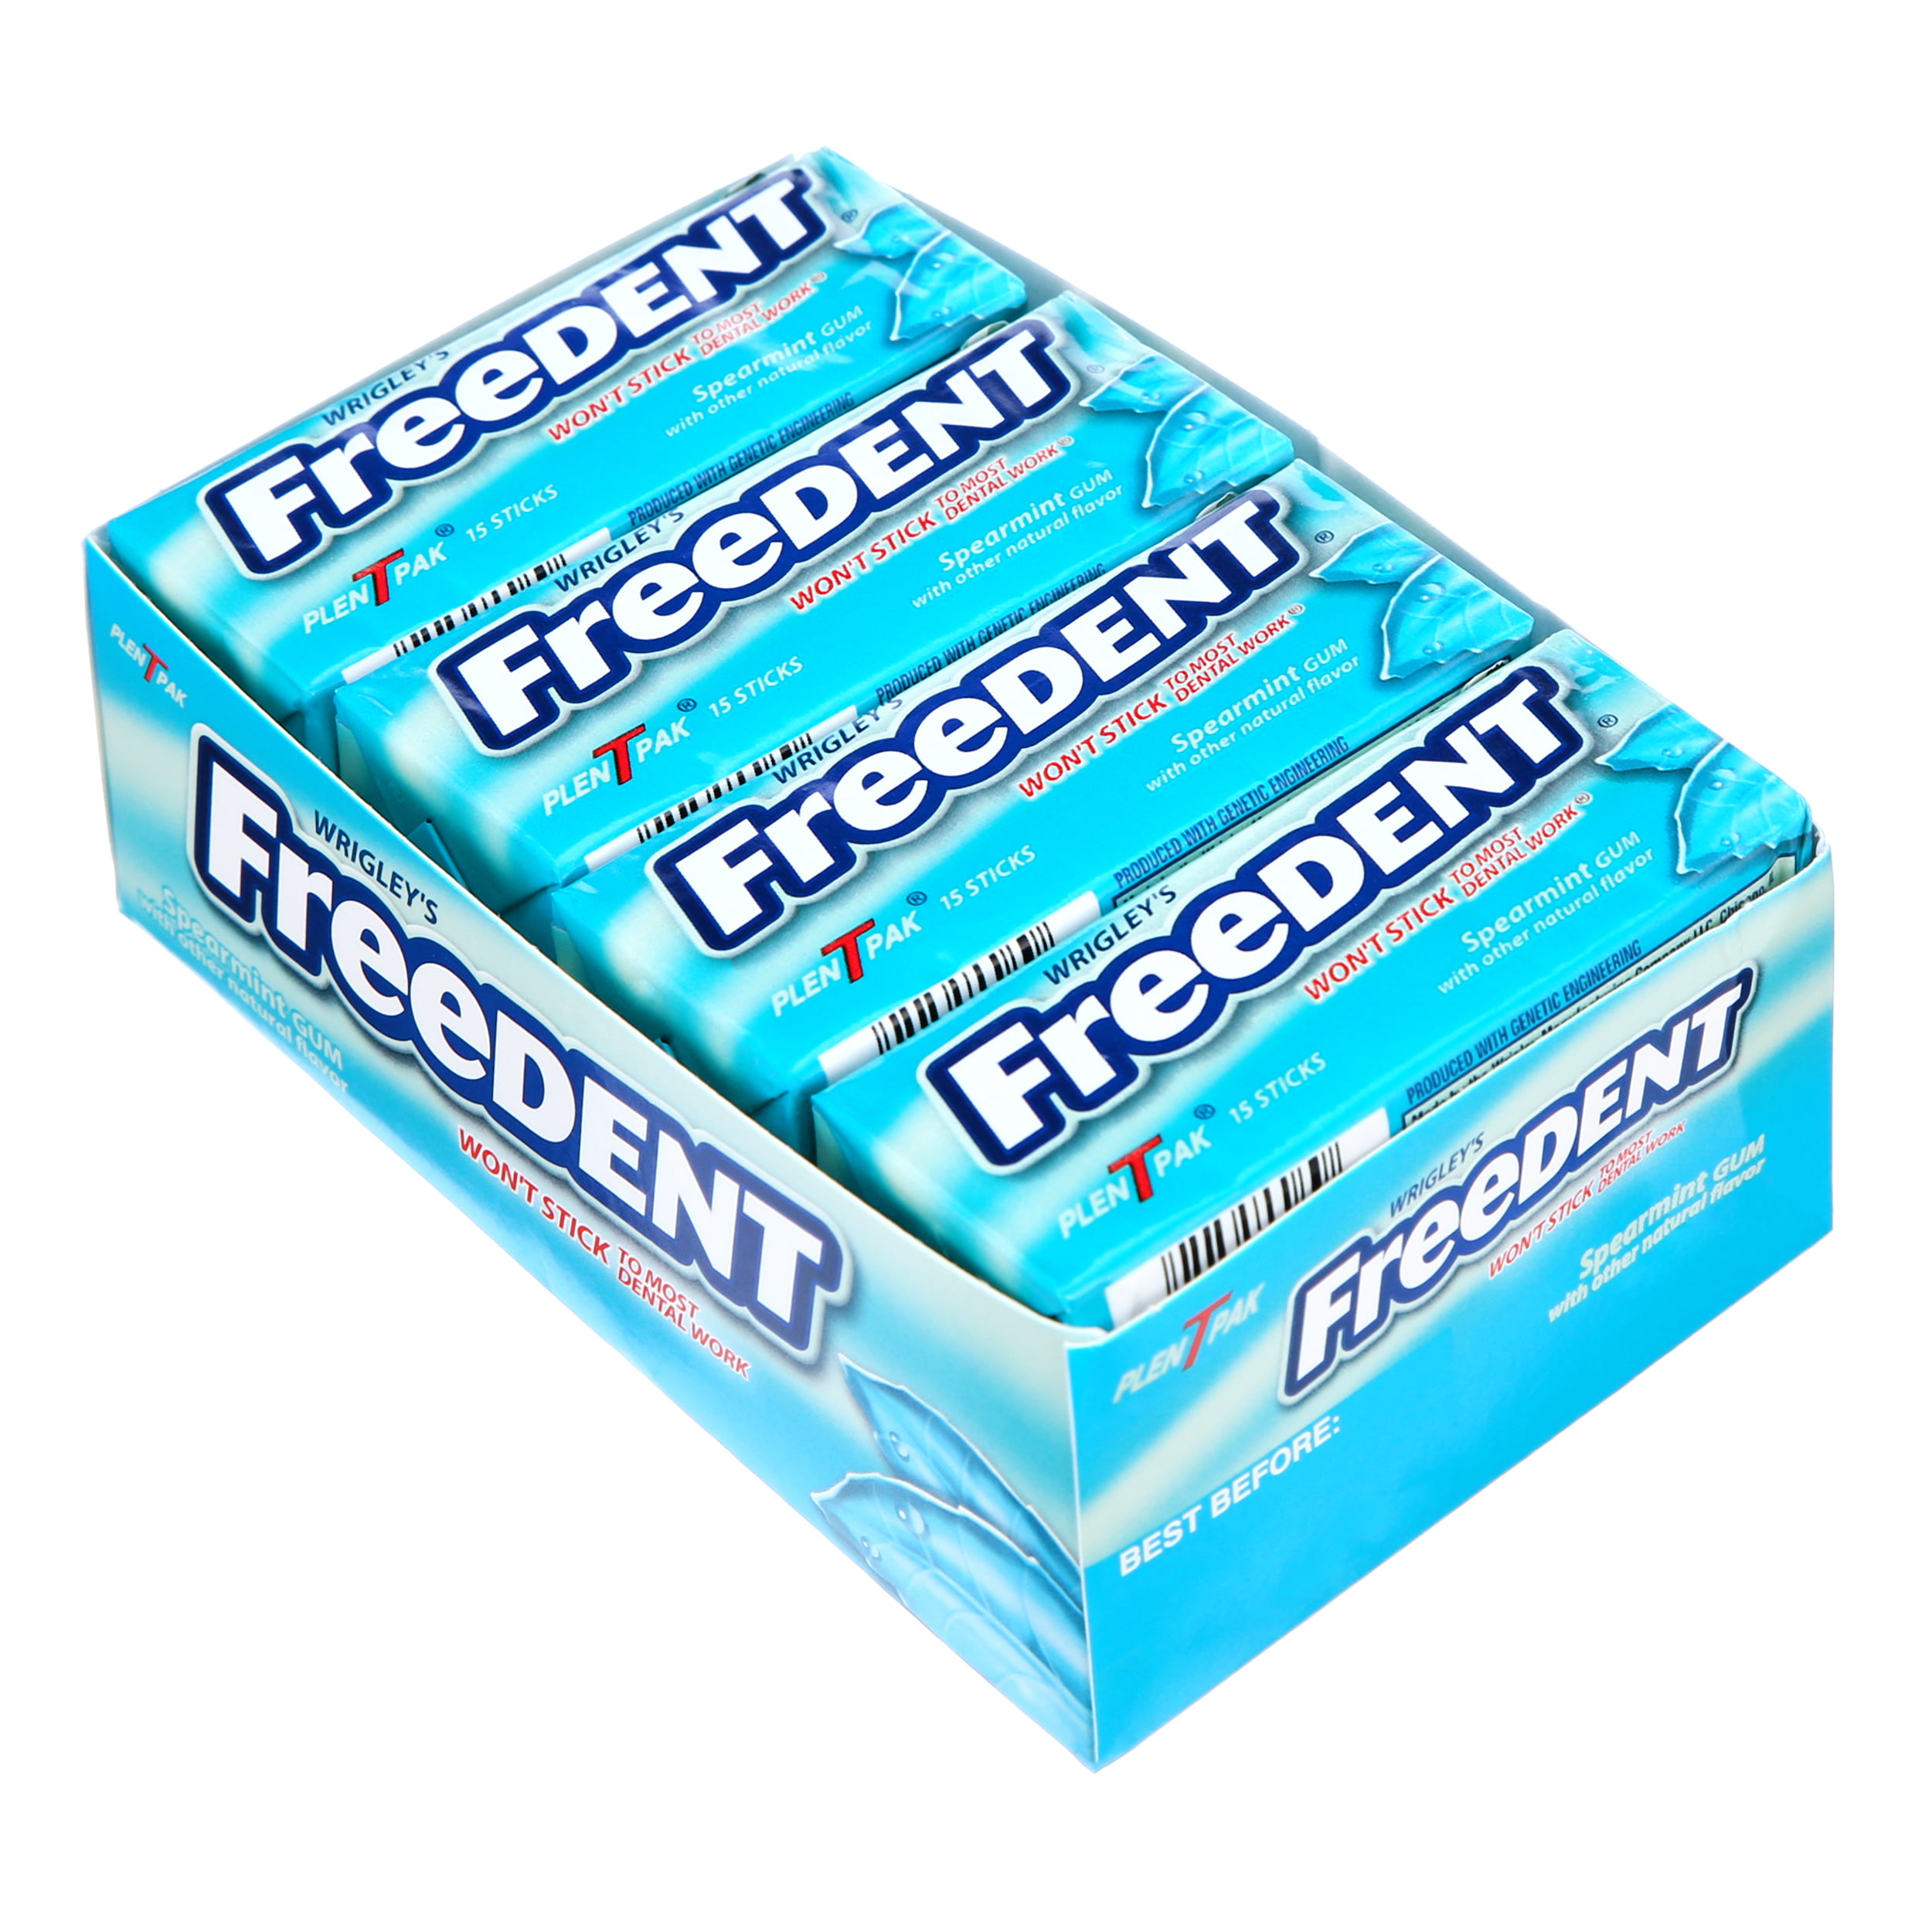 Wrigley's Freedent Spearmint Bulk Chewing Gum, 8 Count